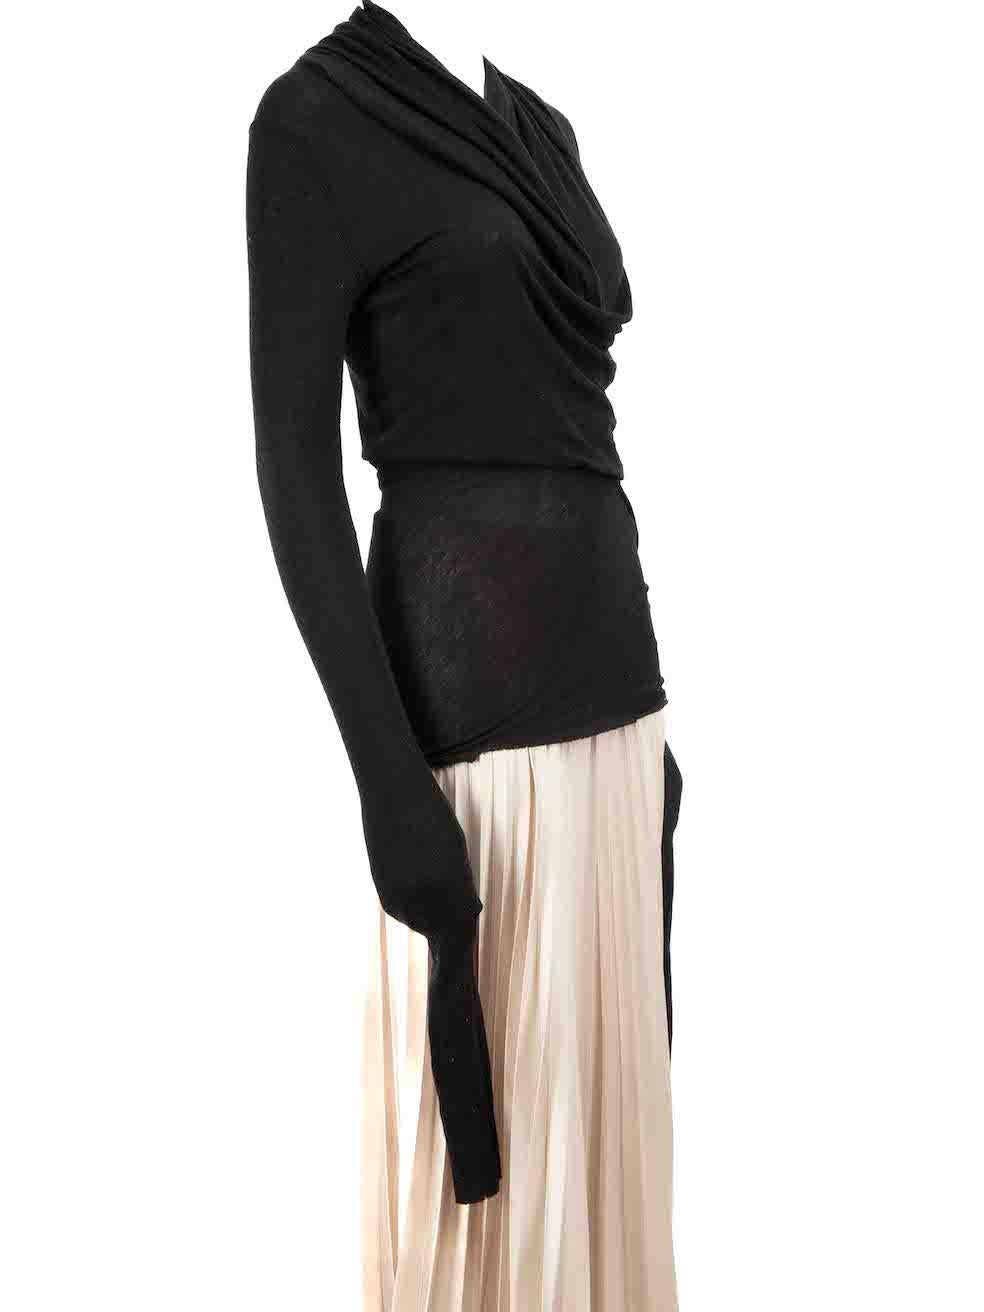 CONDITION is Very good. Minimal wear to top is evident. Minimal wear to overall material where pilling especially to the underarms is evident on this used Rick Owens Lilies designer resale item.
 
 Details
 Black
 Synthetic
 Knit top
 Long sleeves
